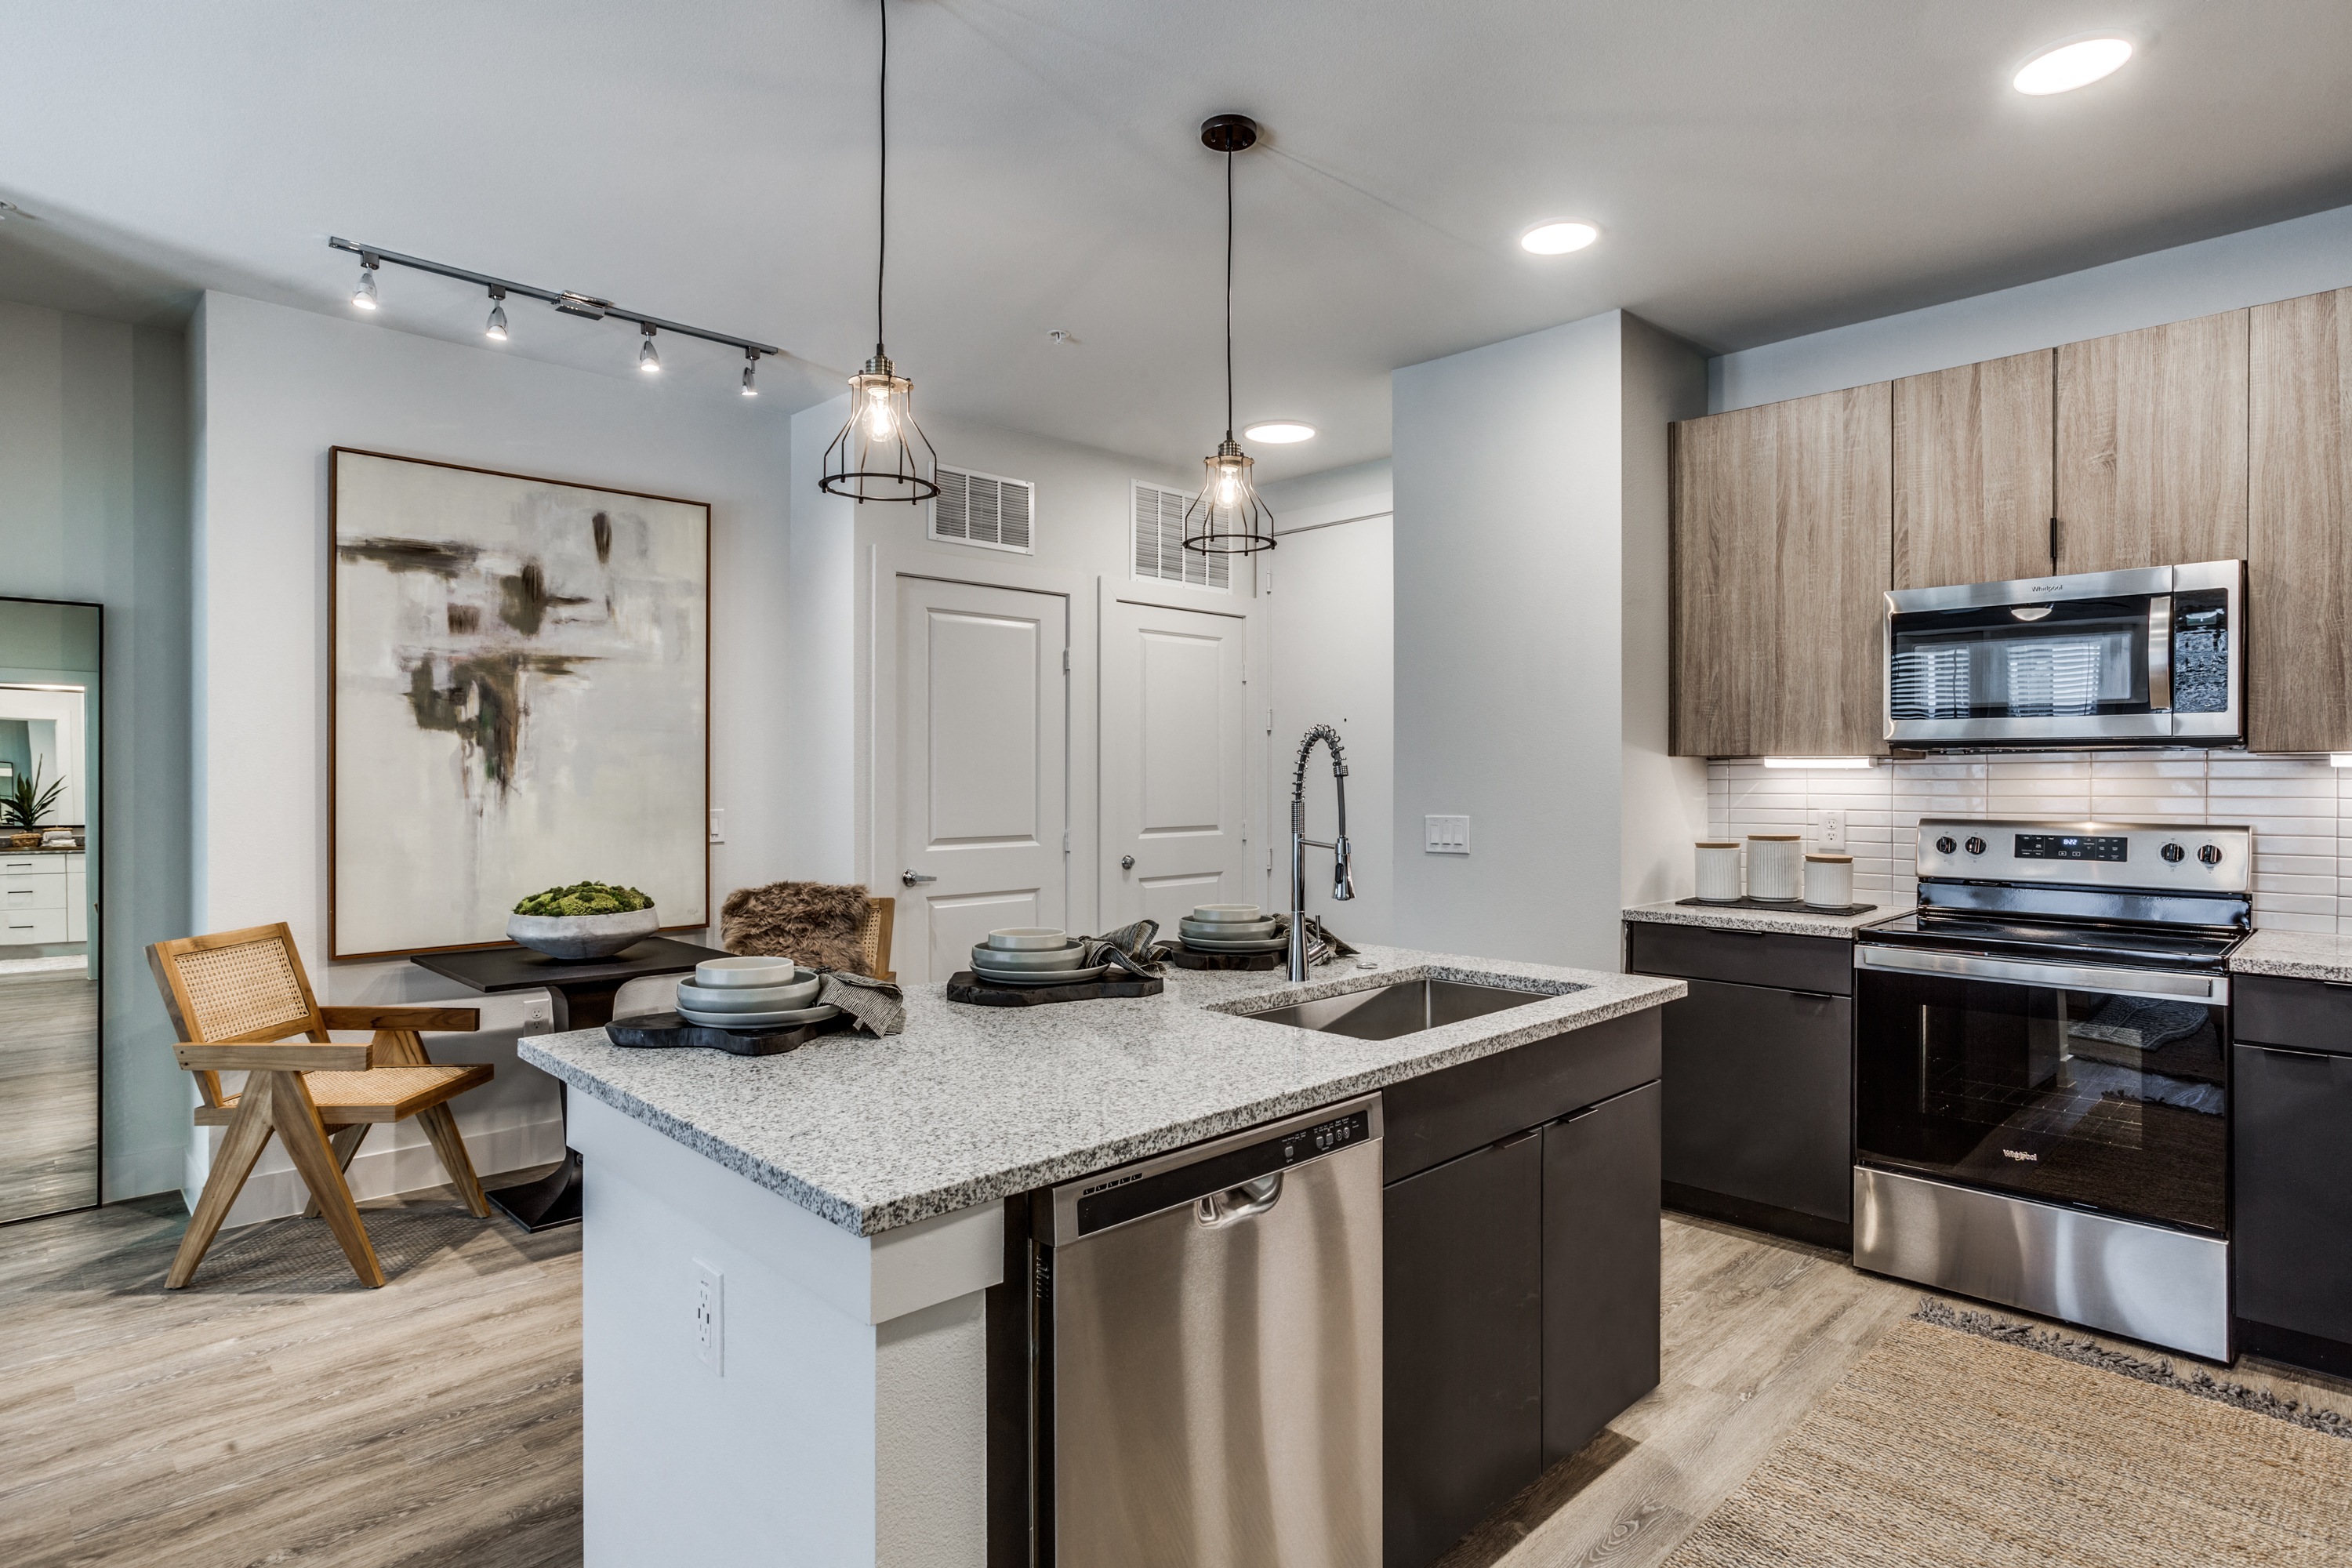 Model kitchen at Station at Old Town Apartments in Lewisville, TX 75075